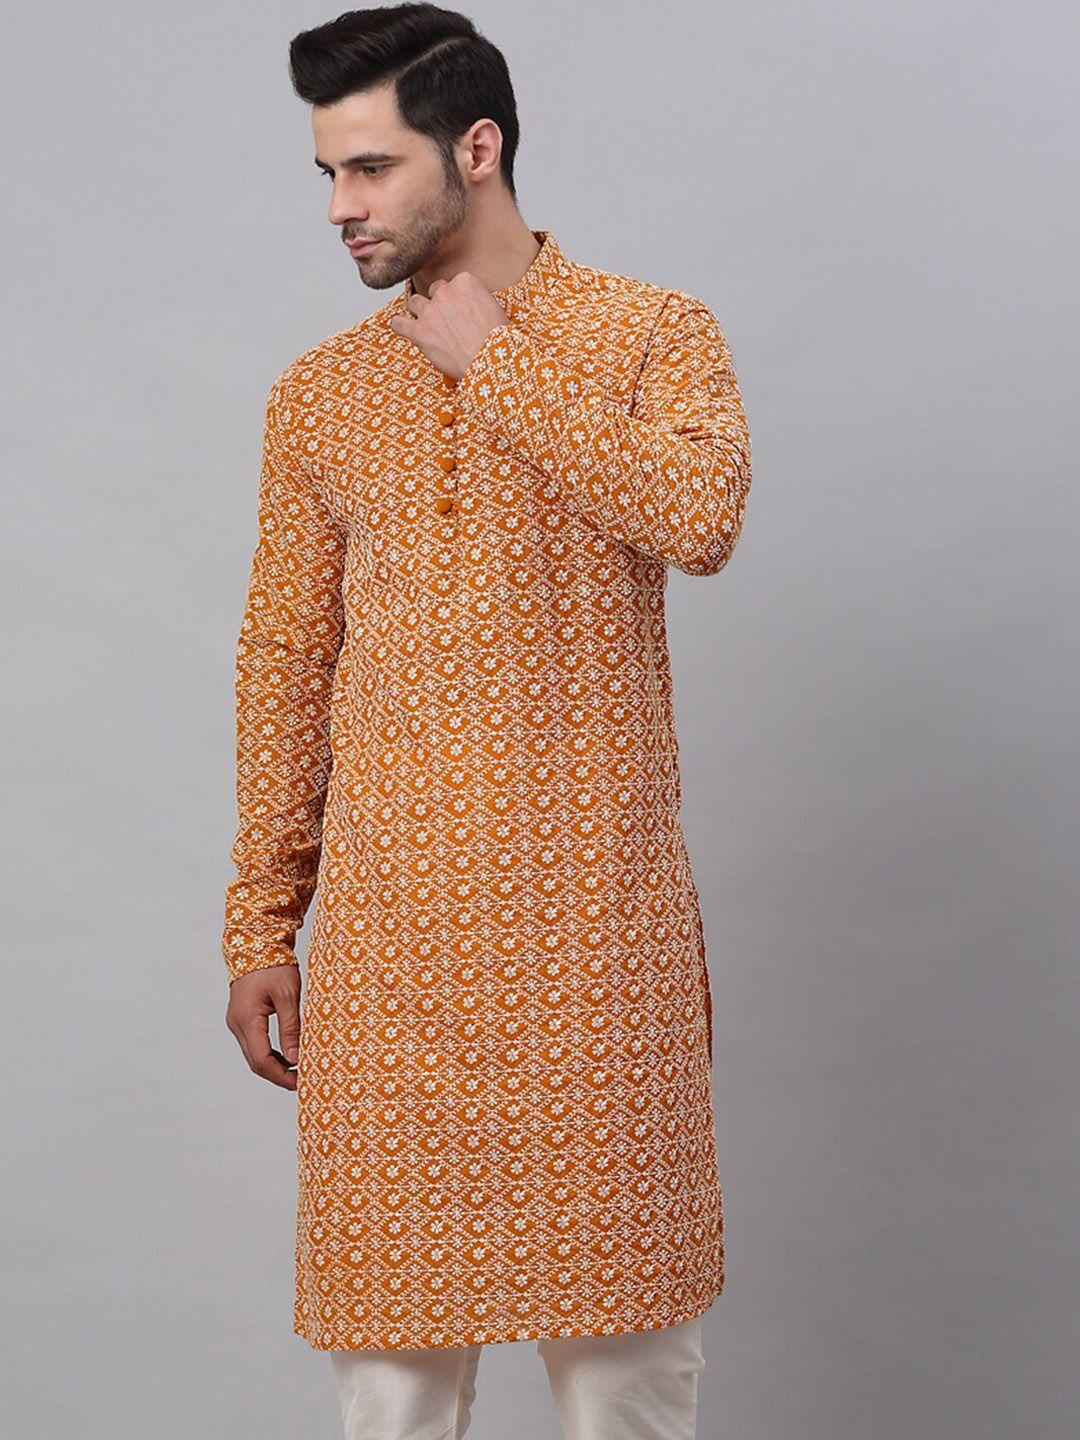 jompers men mustard yellow floral embroidered pure cotton kurta